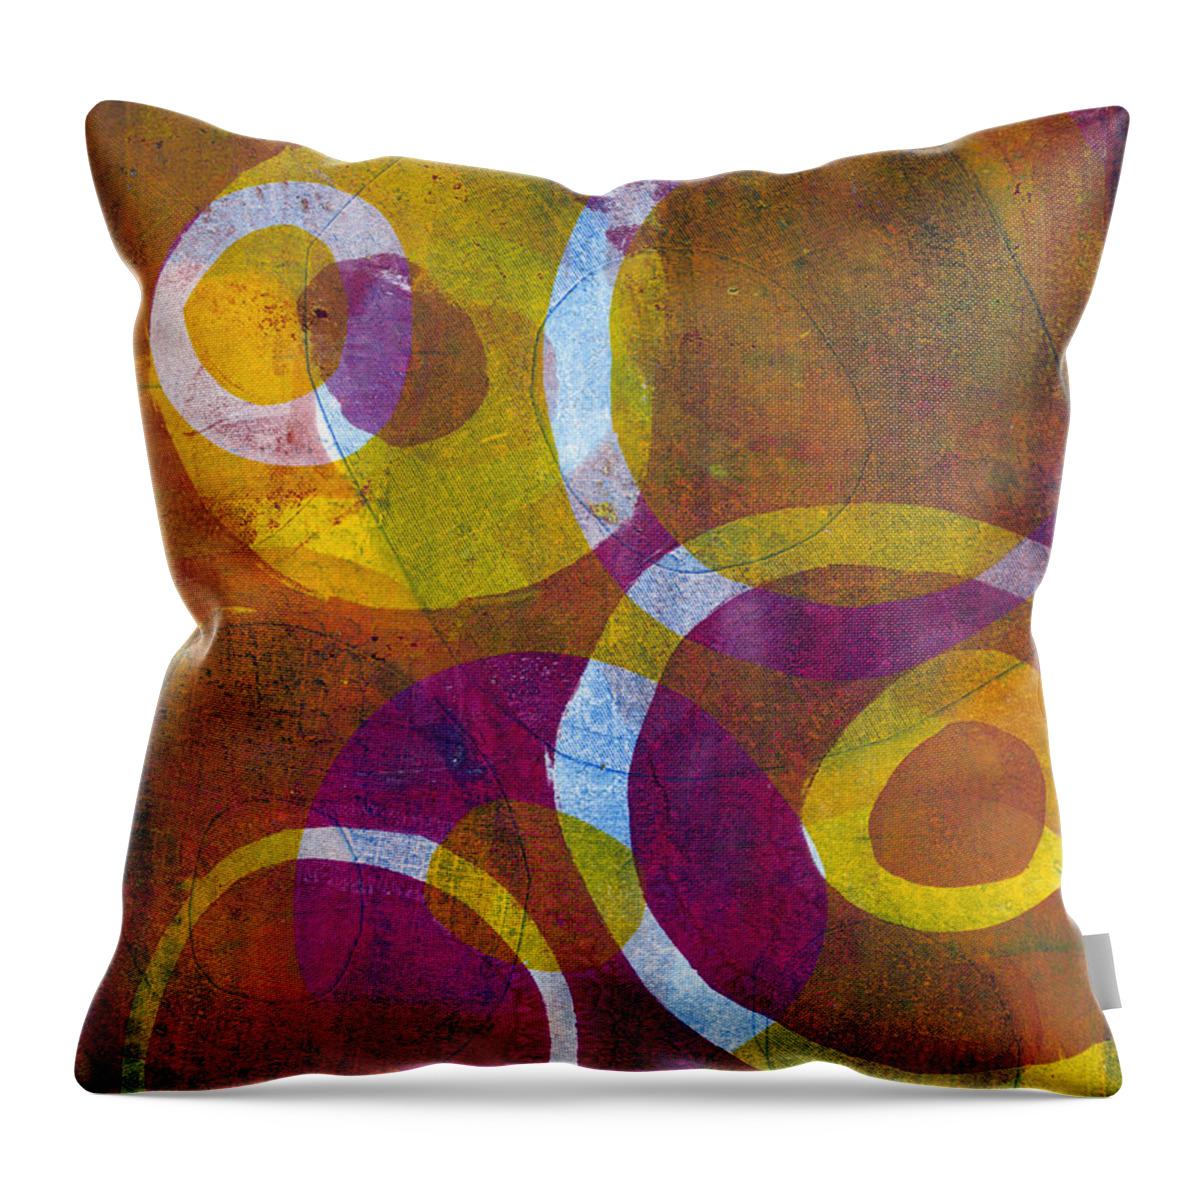 Abstract Throw Pillow featuring the painting Cells 2 by Laurel Englehardt